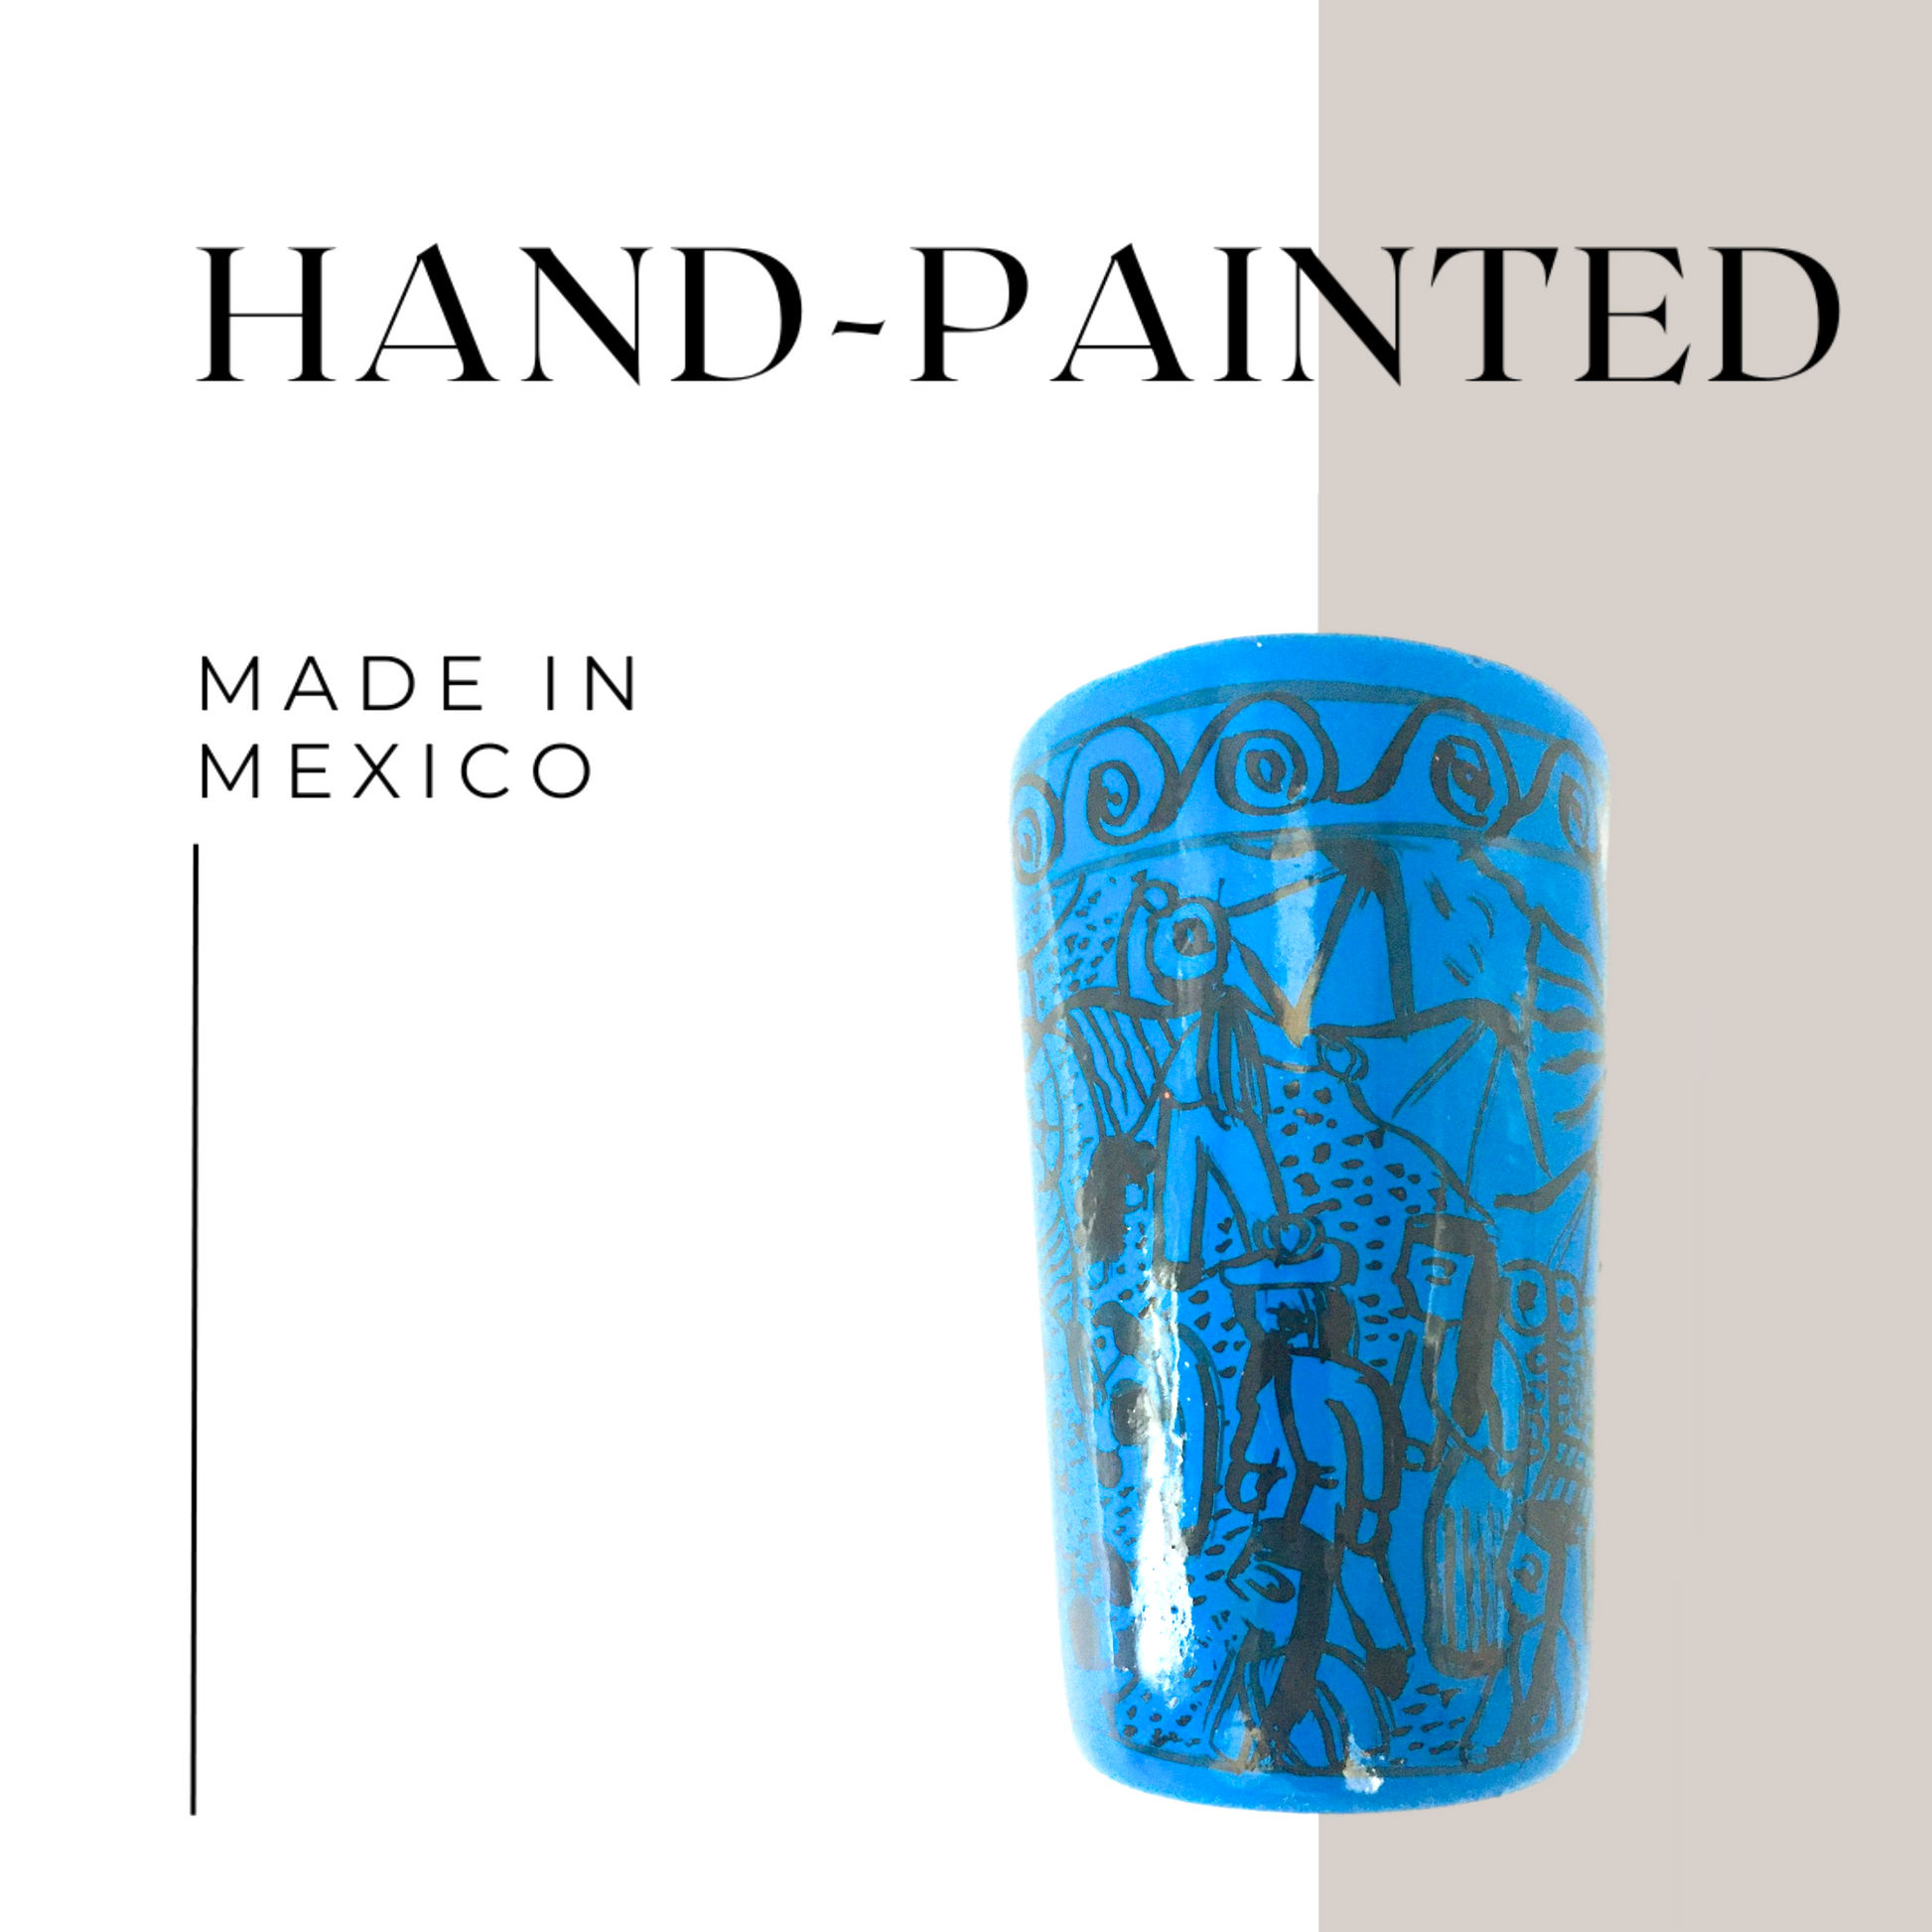 Blue ceramic shot glasses, individually hand-painted in Mexico, perfect for tequila, mezcal, or other spirits, pack of 2.